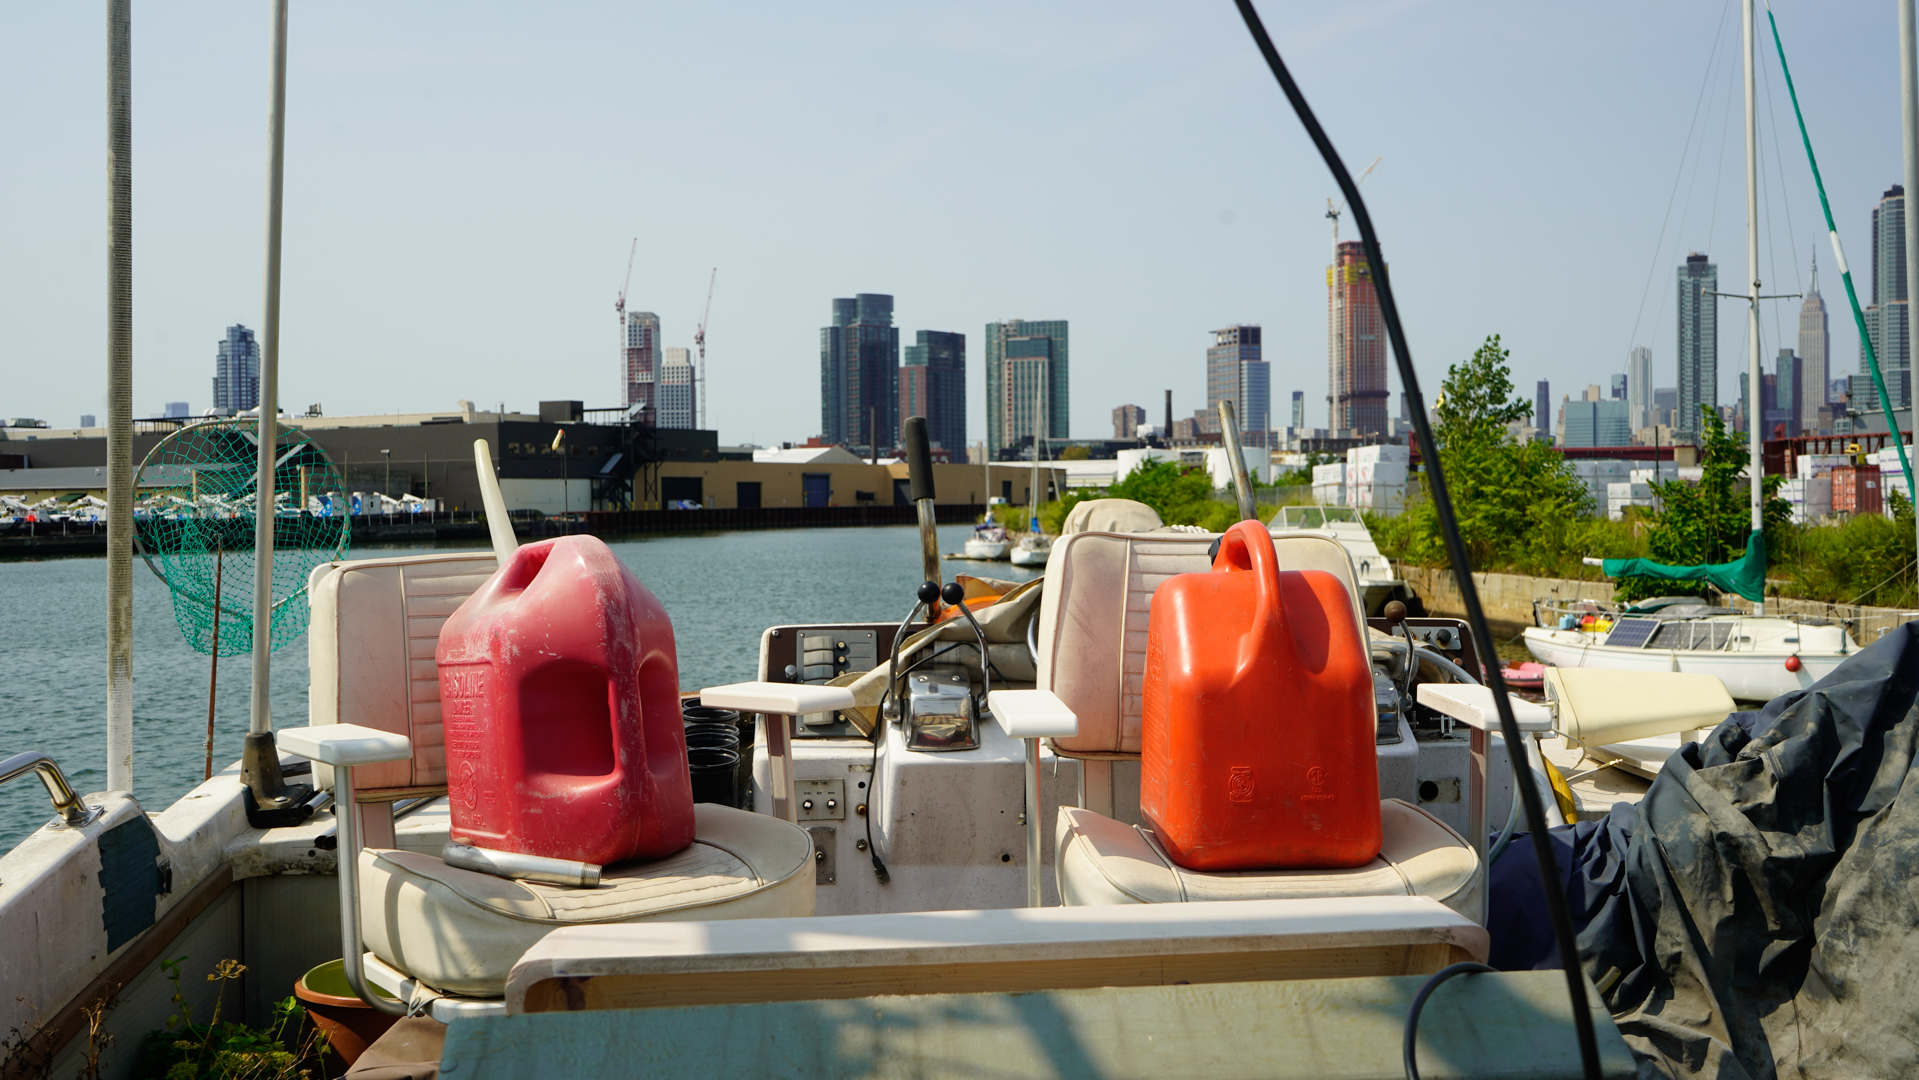 Fuel containers on a boat